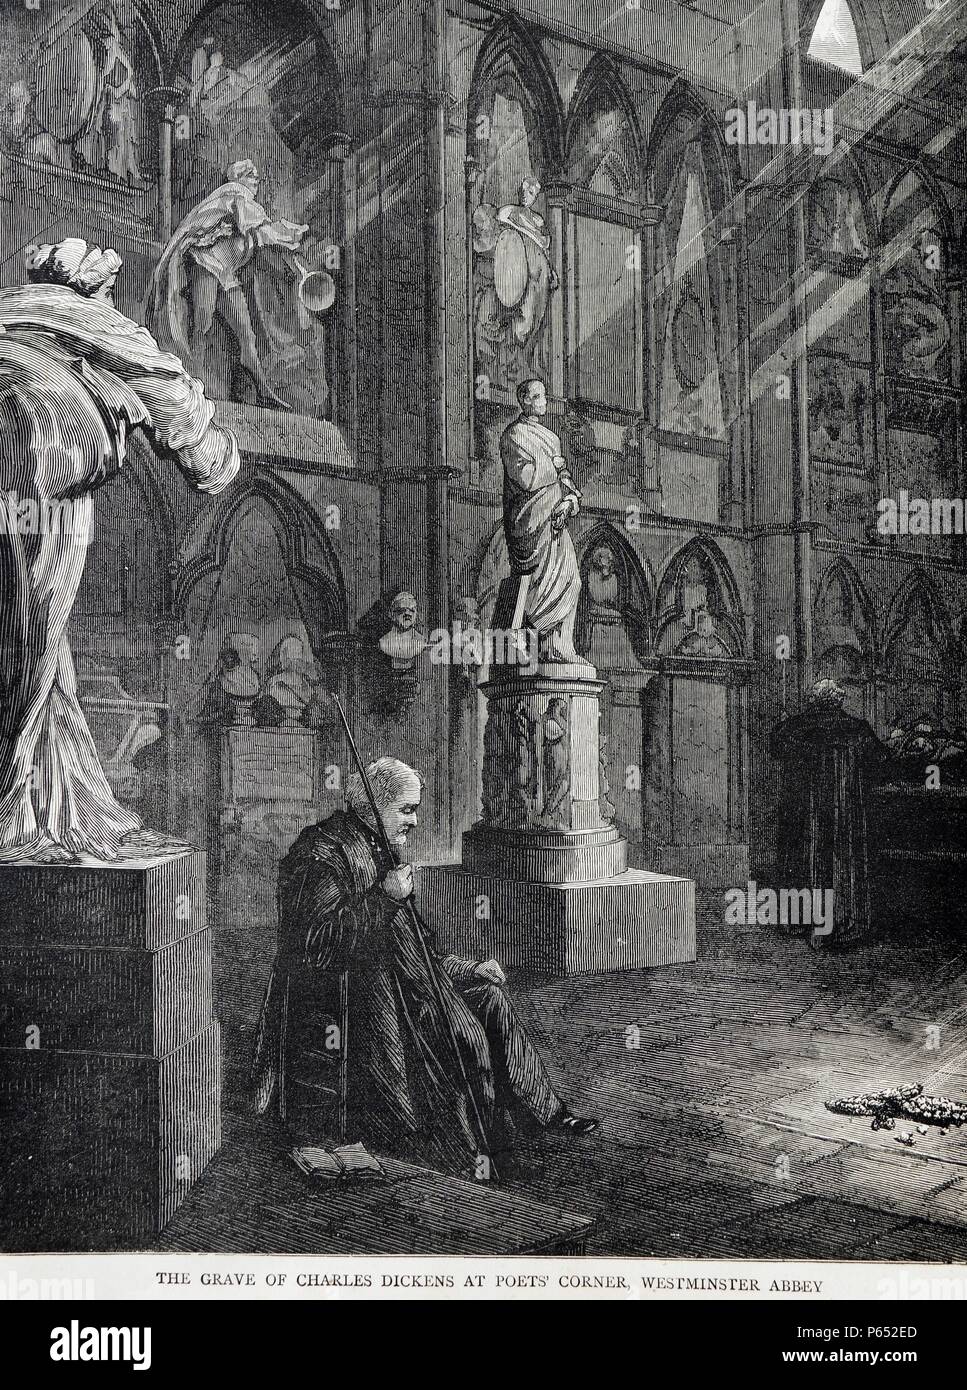 Illustration depicts the grave of Charles Dickens (1812-1870) at Poets' Corner, Westminster Abbey. Charles Dickens was an English writer and social critic during the Victorian period. Dated 1870 Stock Photo